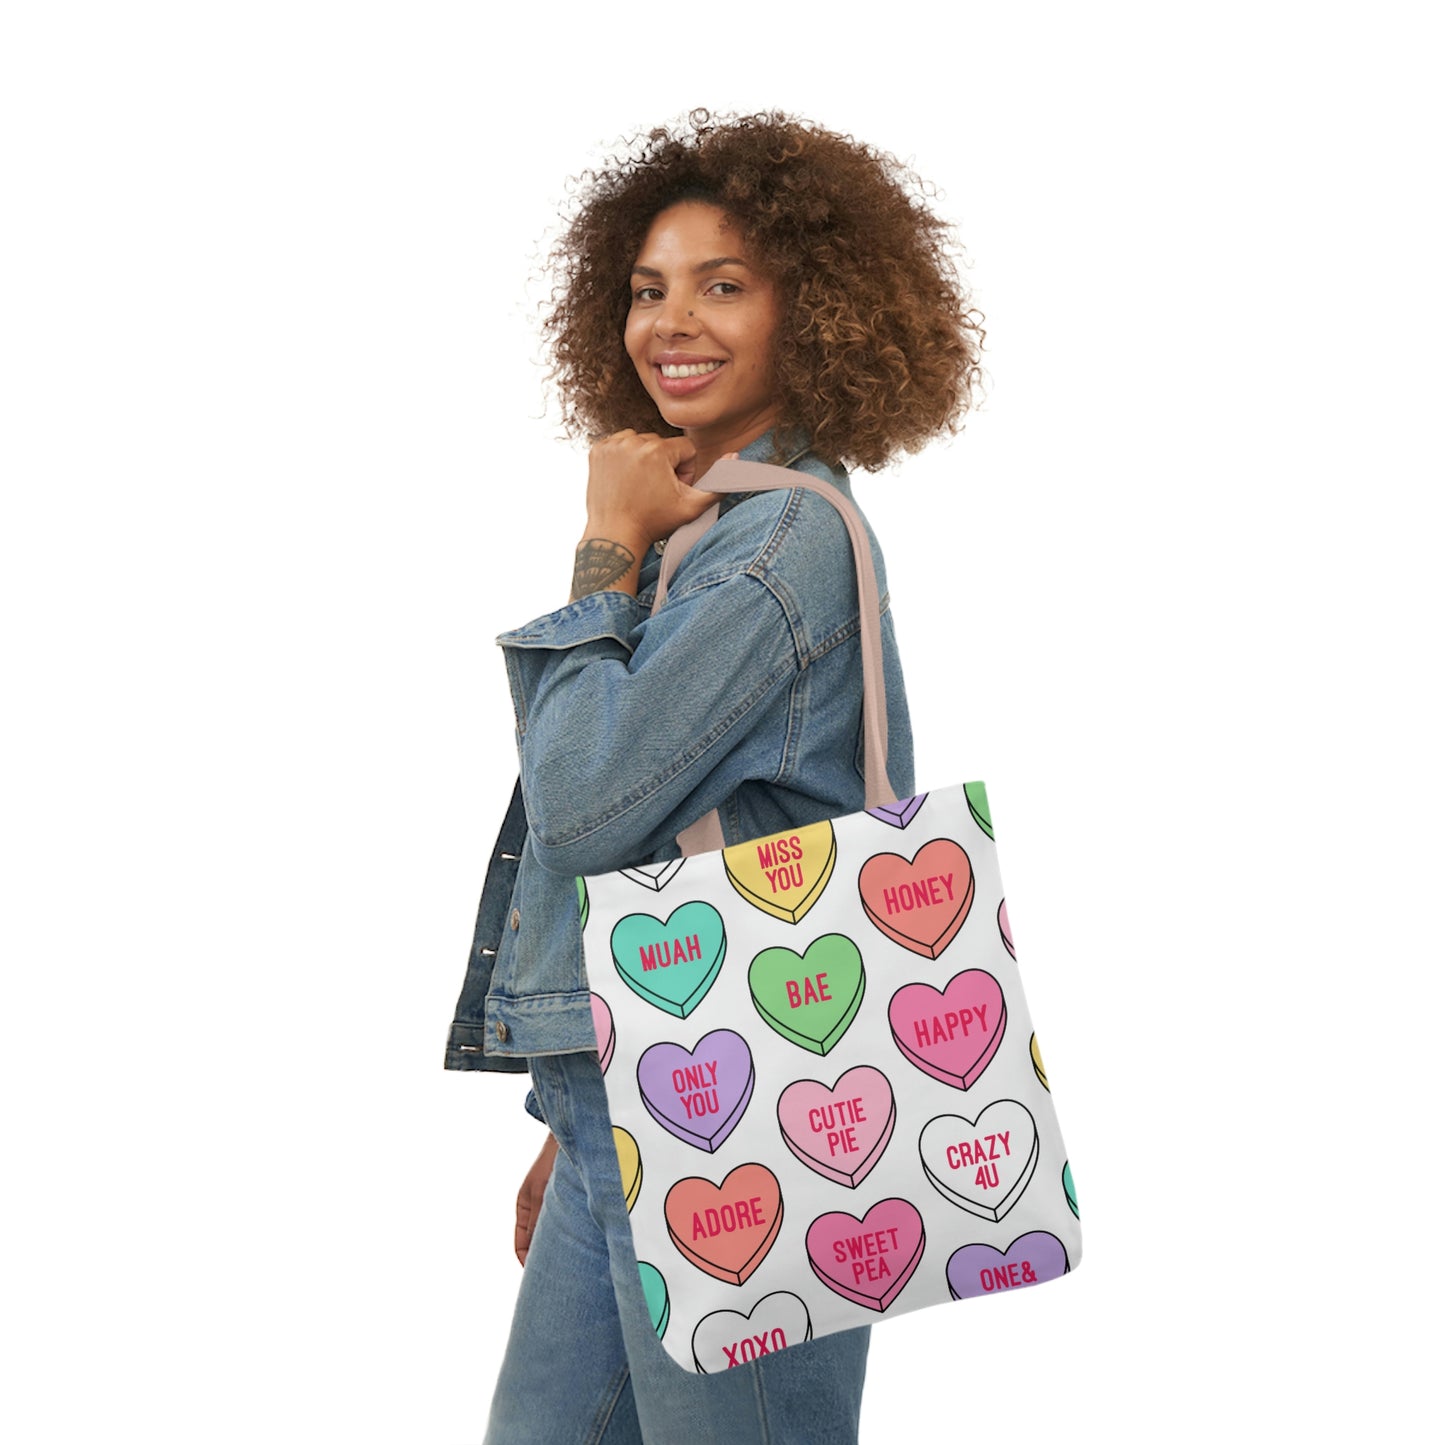 Candy Conversation Hearts Canvas Tote Bag